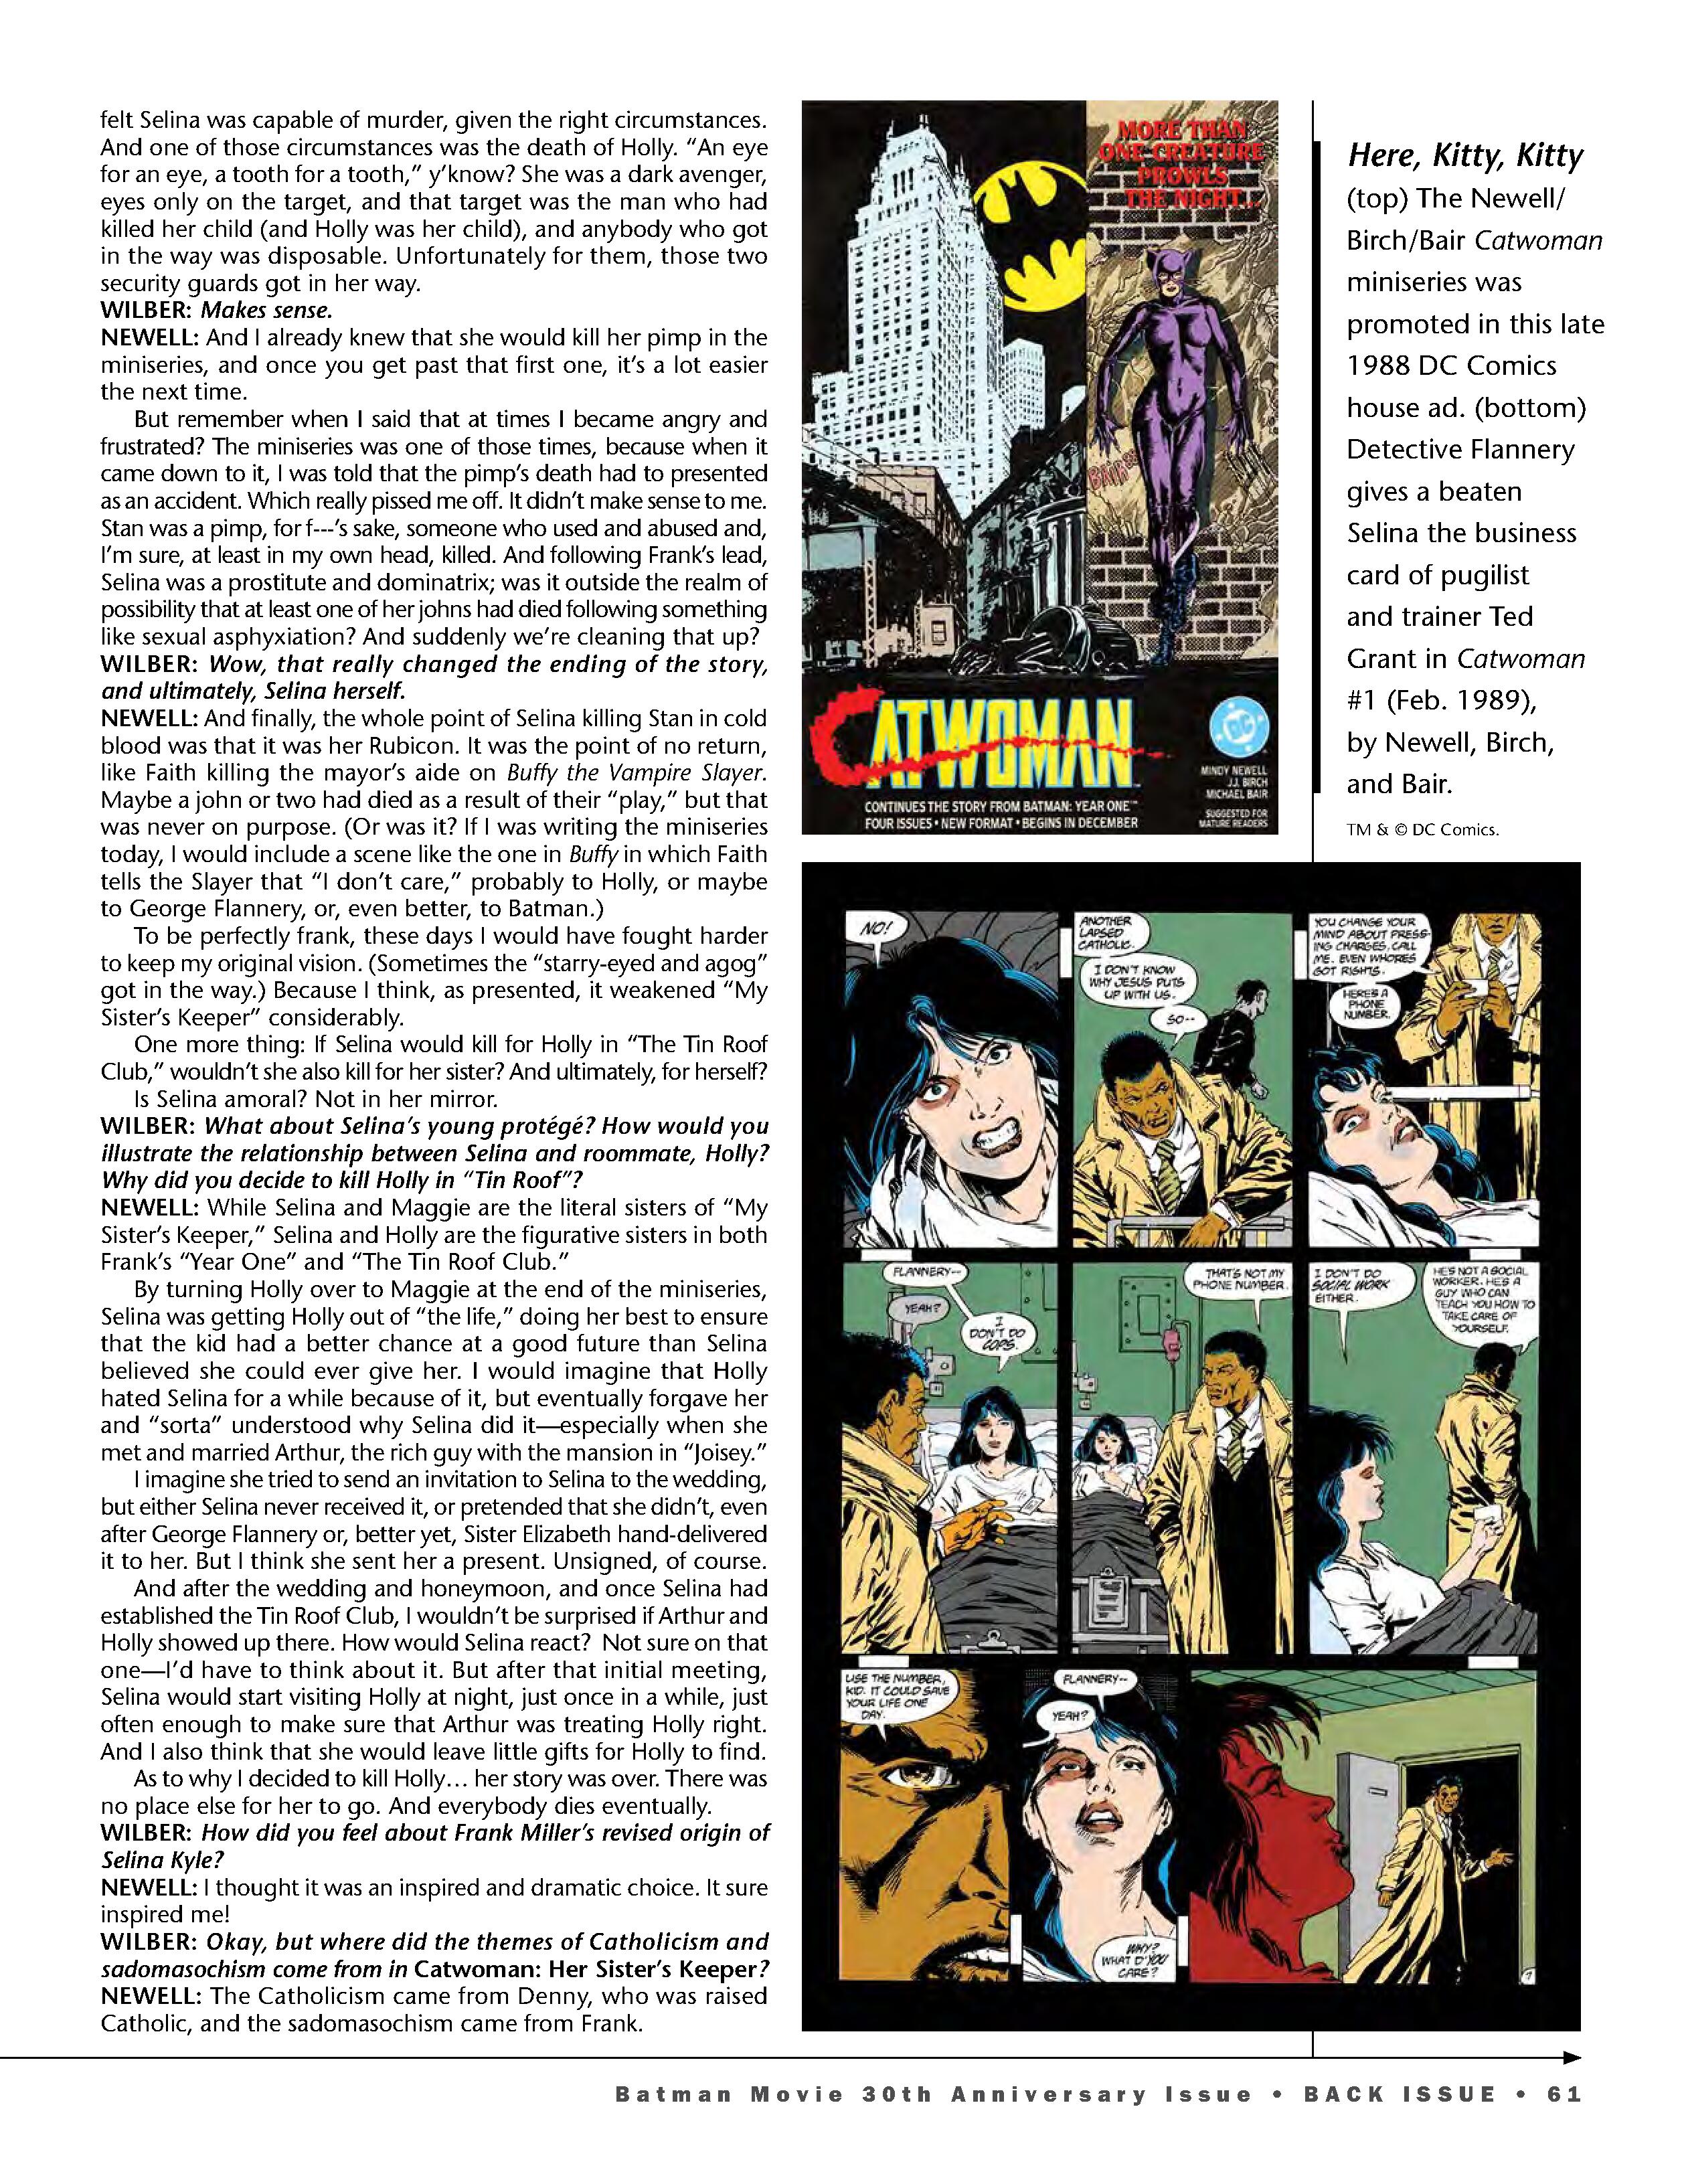 Read online Back Issue comic -  Issue #113 - 63